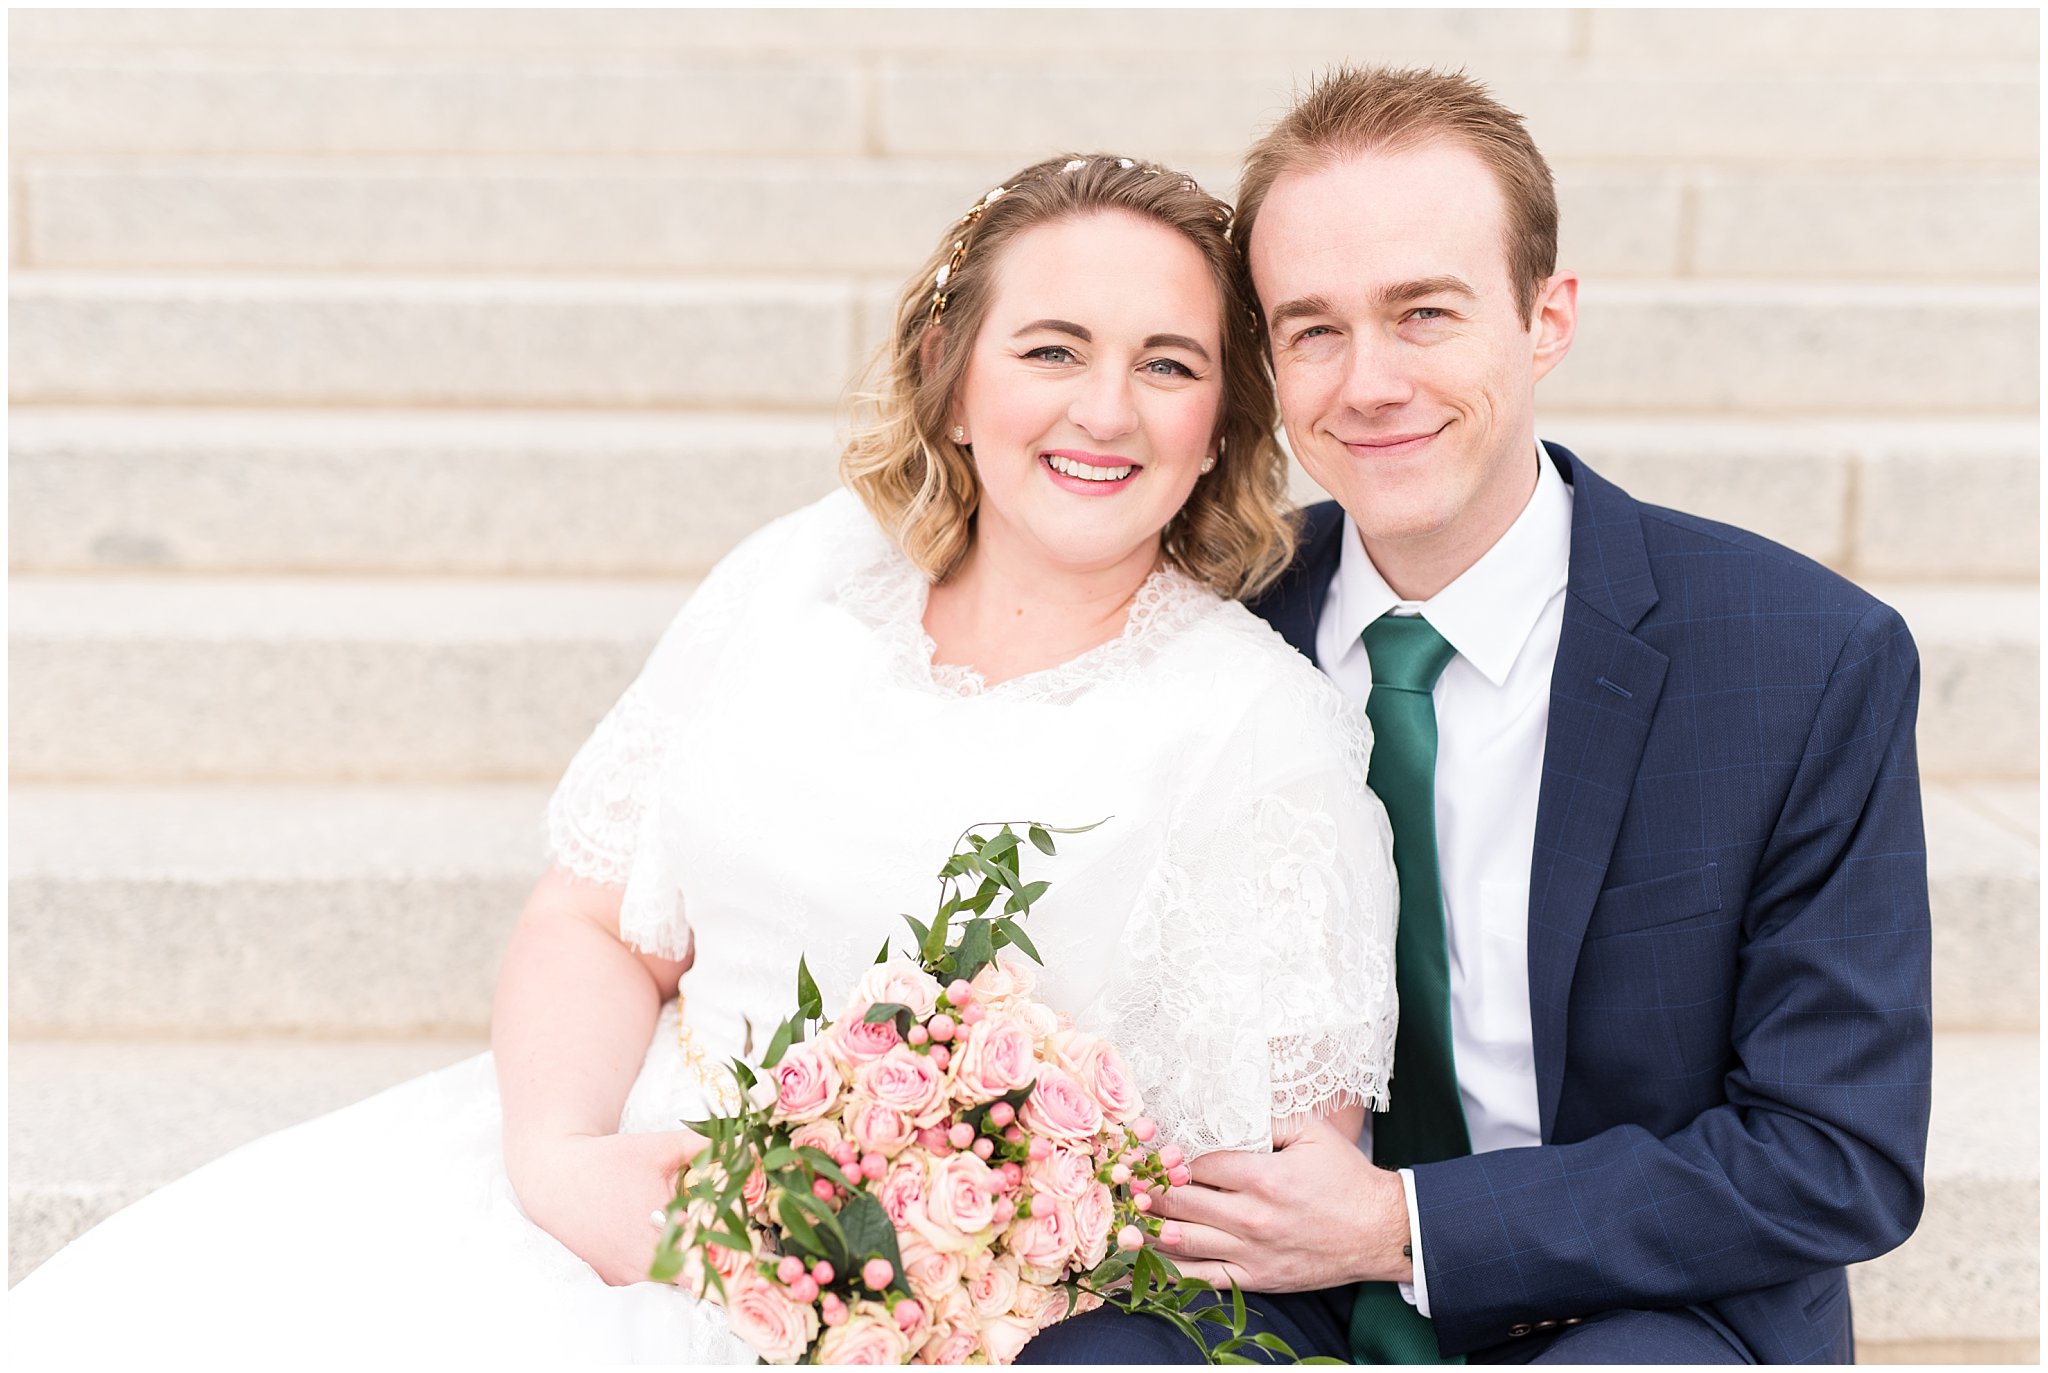 Bride and groom smiling at the camera sitting on steps | Winter Formals at the Utah State Capitol | Utah Wedding Photography